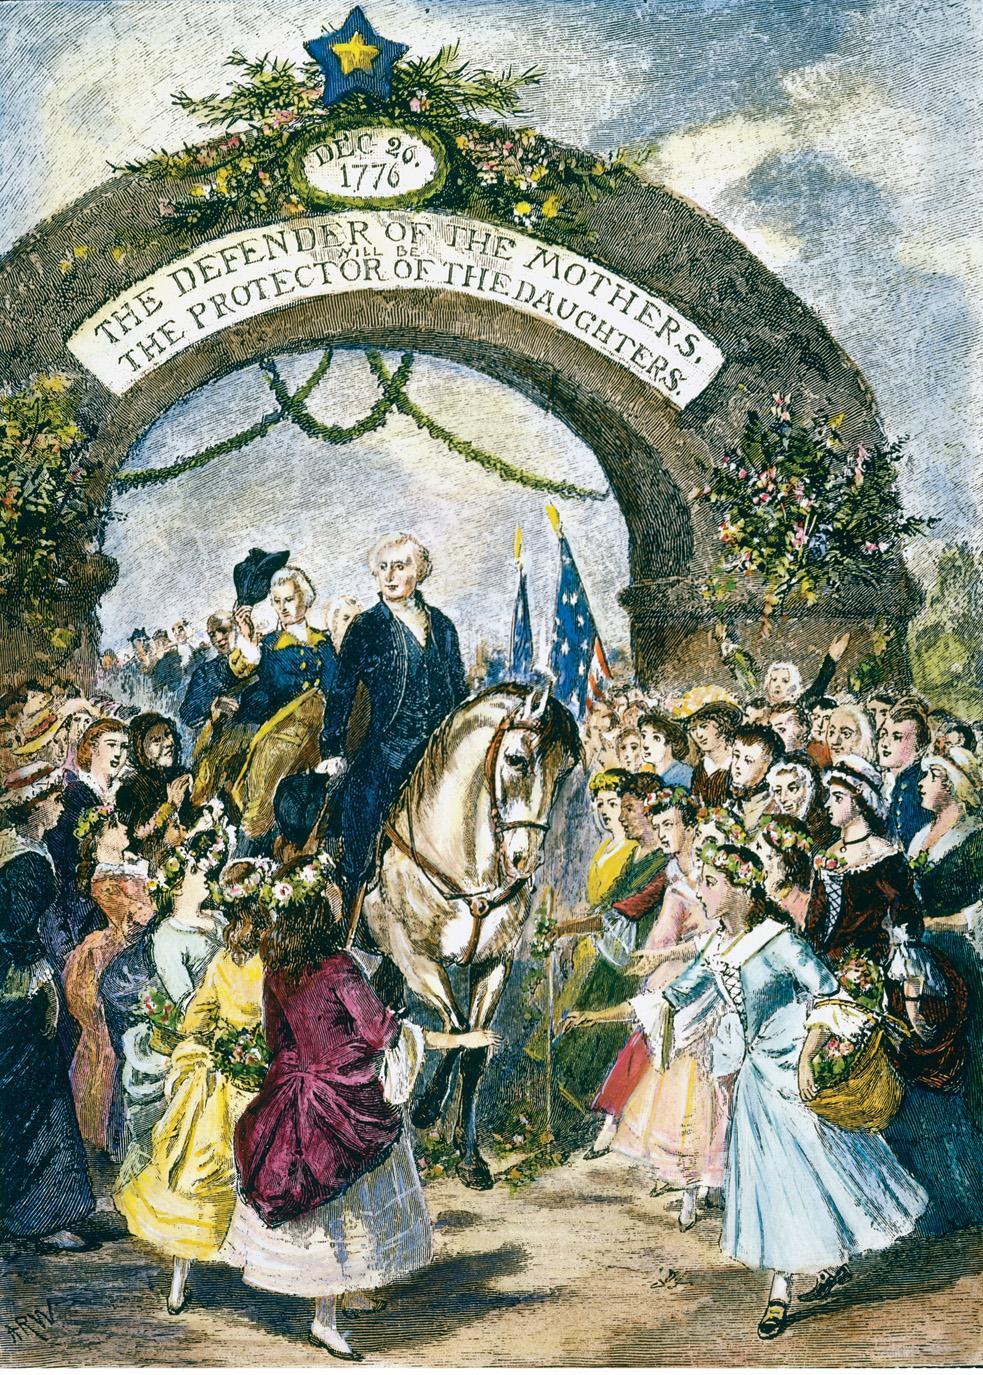 This engraving shows respectful crowds greeting Washington as he passes